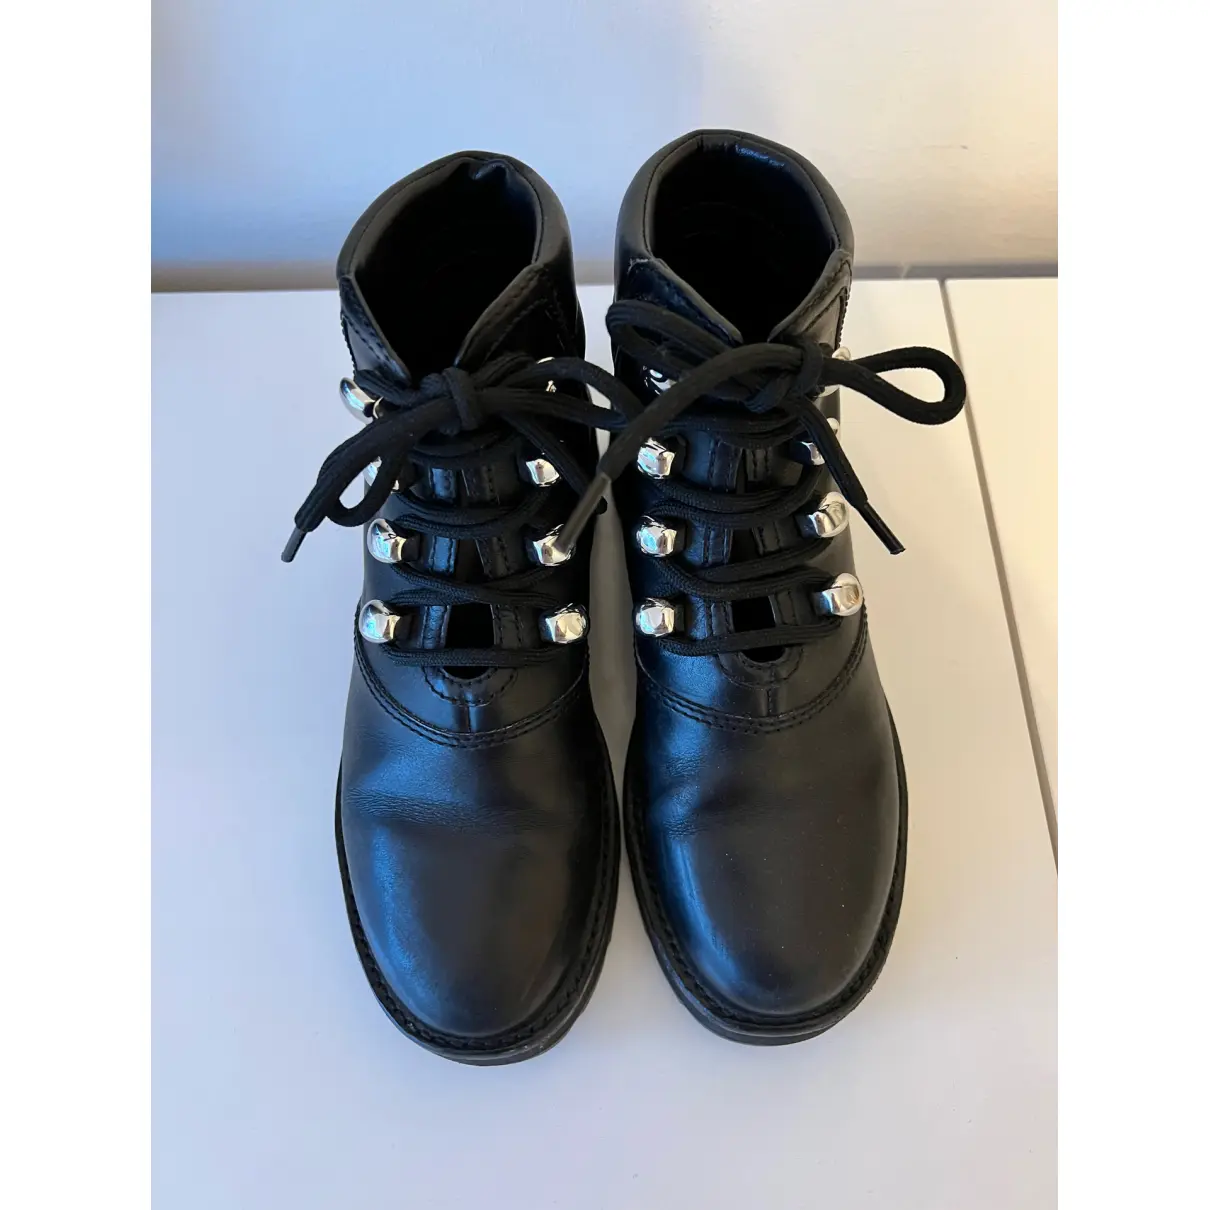 Buy 3.1 Phillip Lim Leather ankle boots online